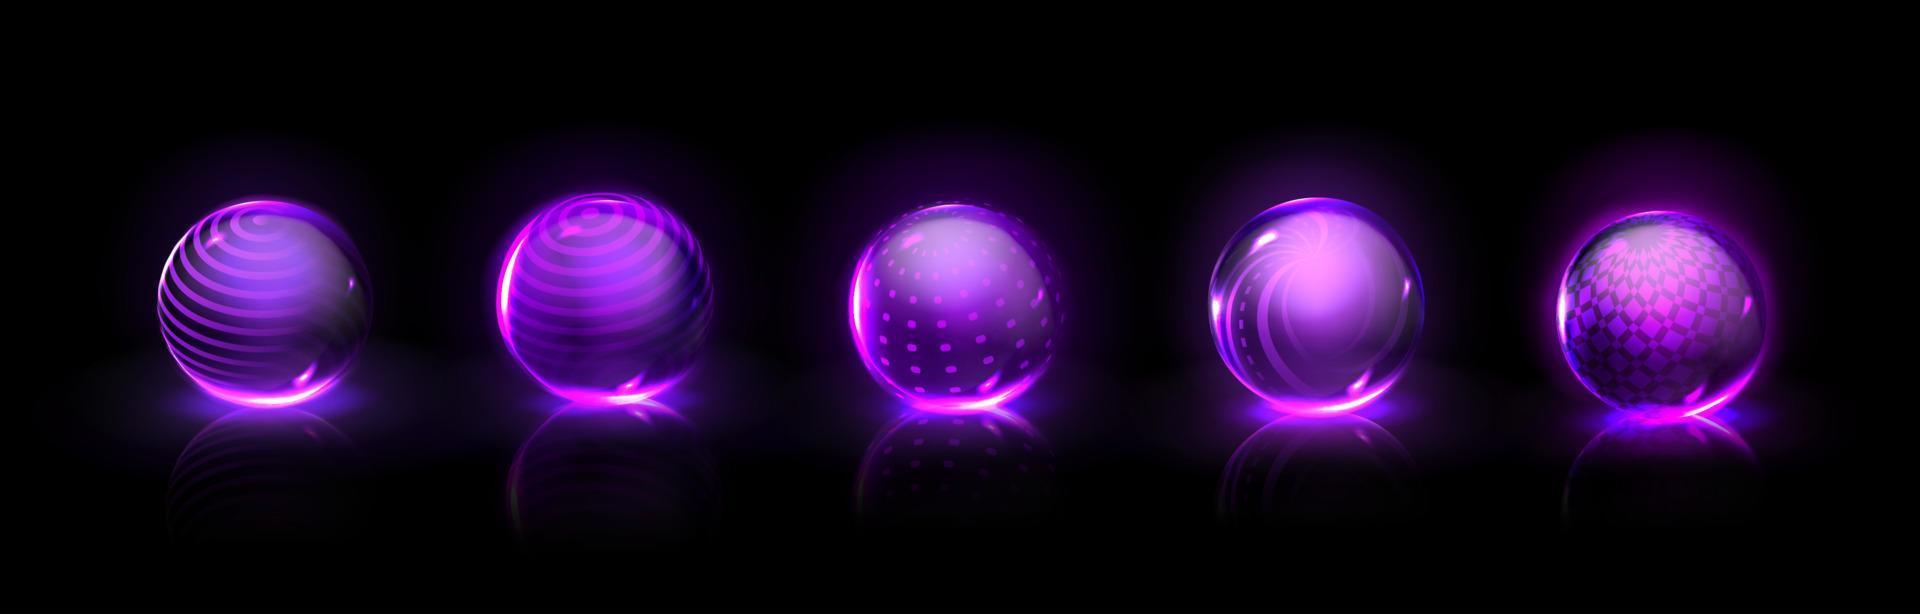 Force shield bubbles, power energy glass spheres vector